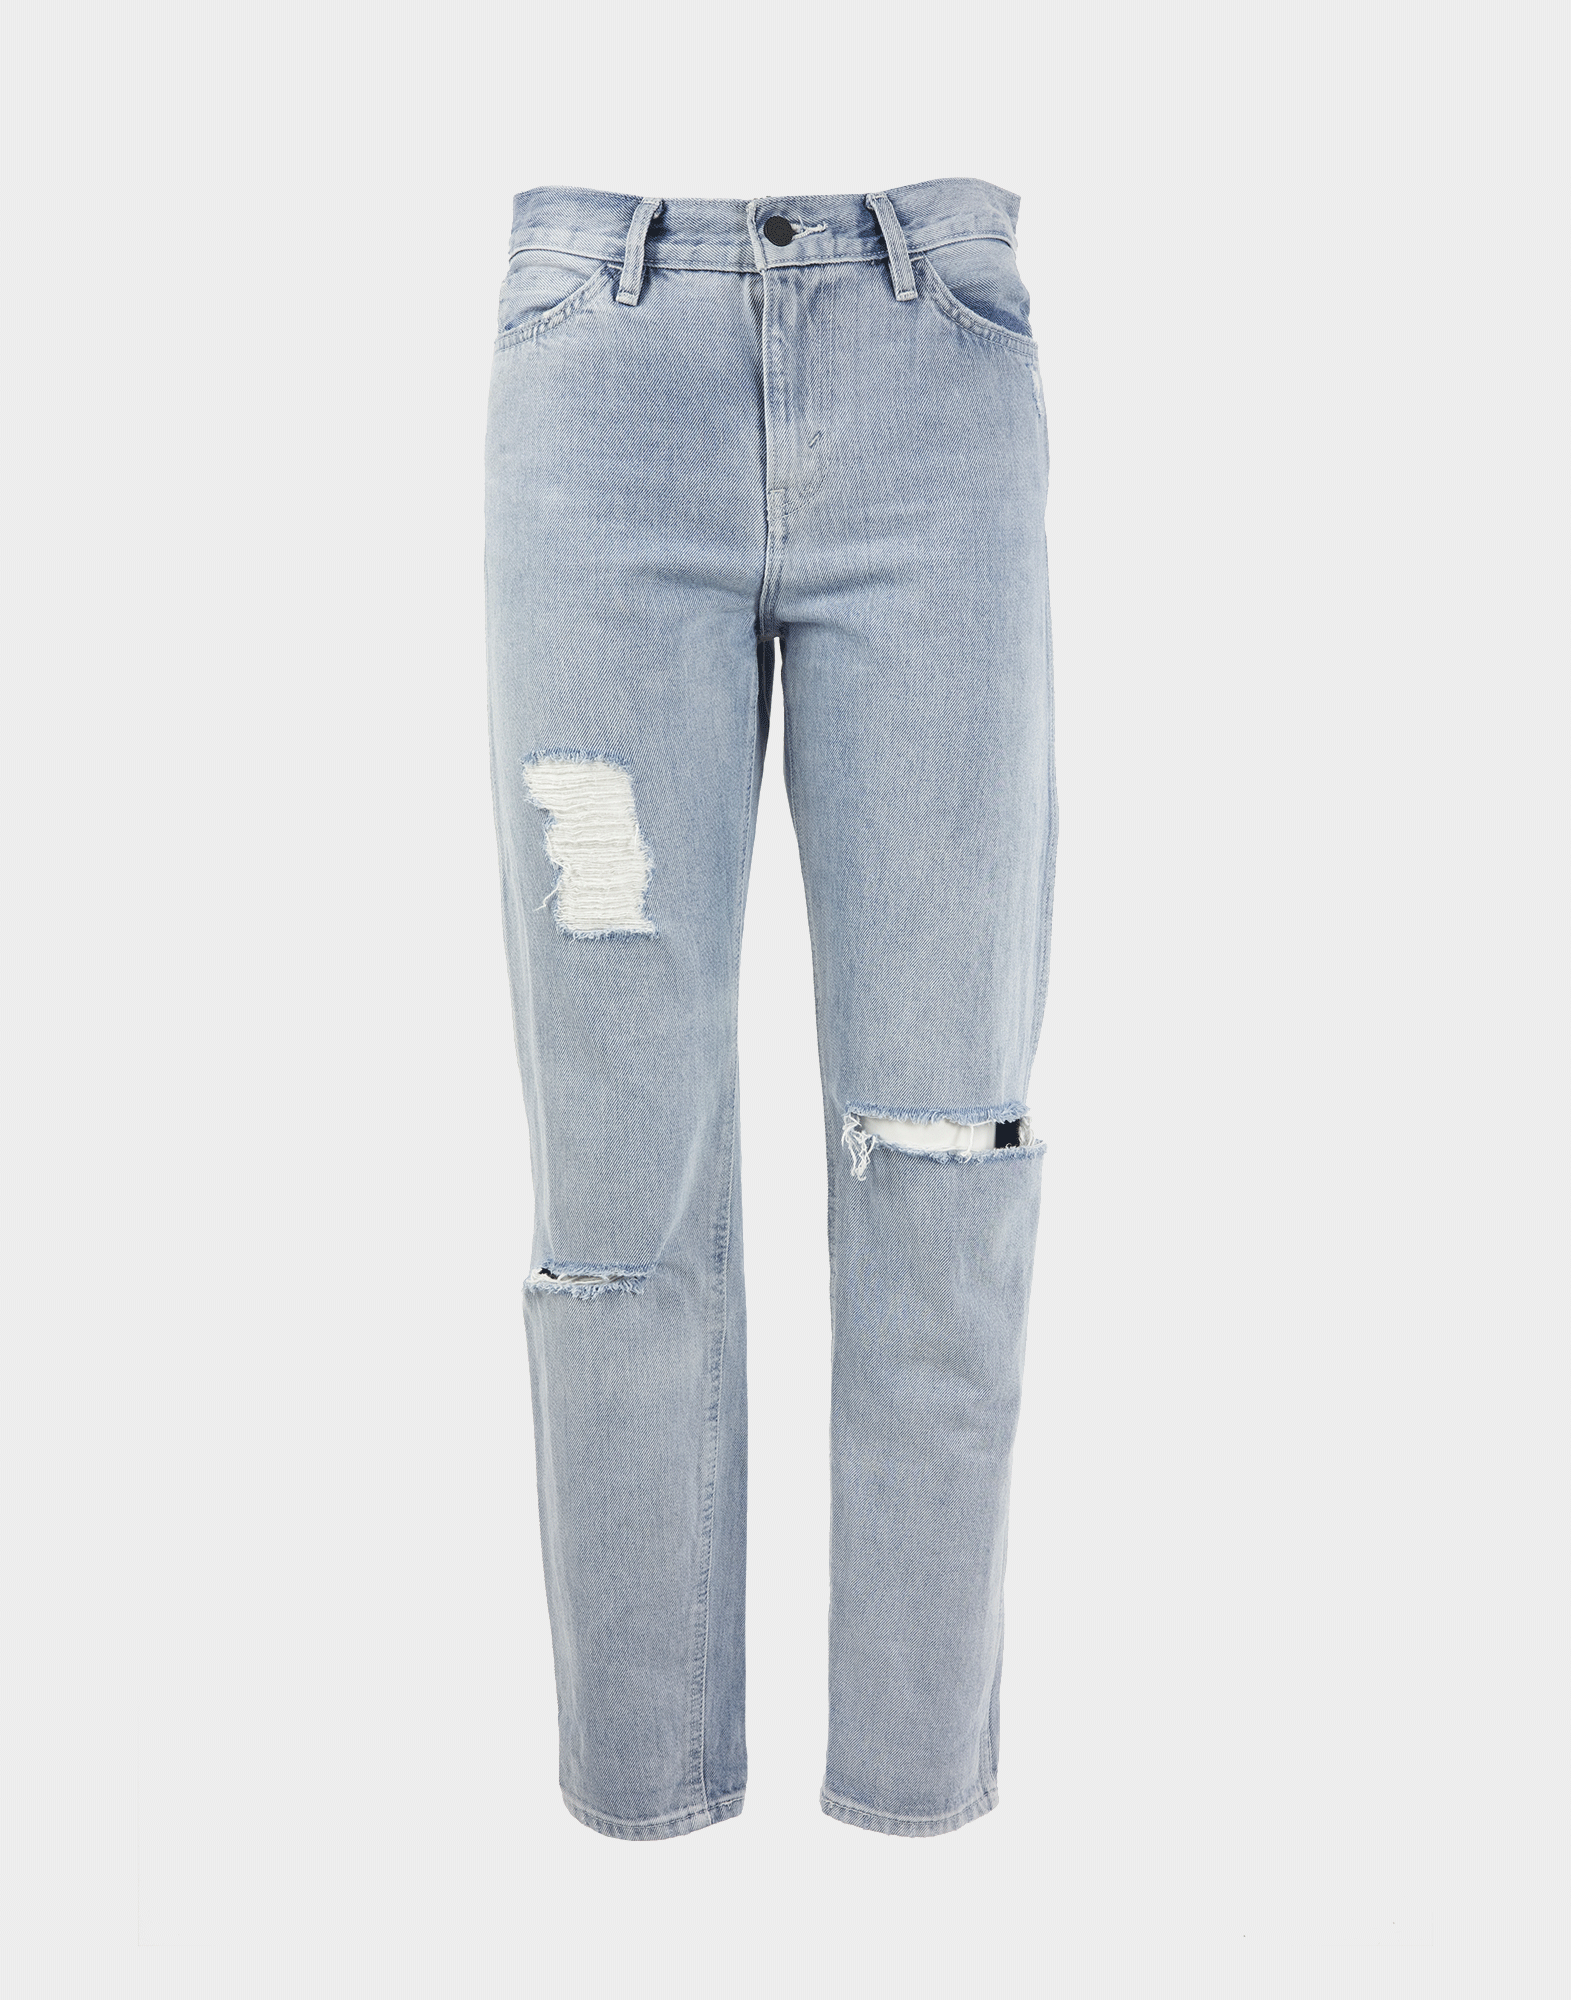 Levi's light denim jeans with distressing on the legs